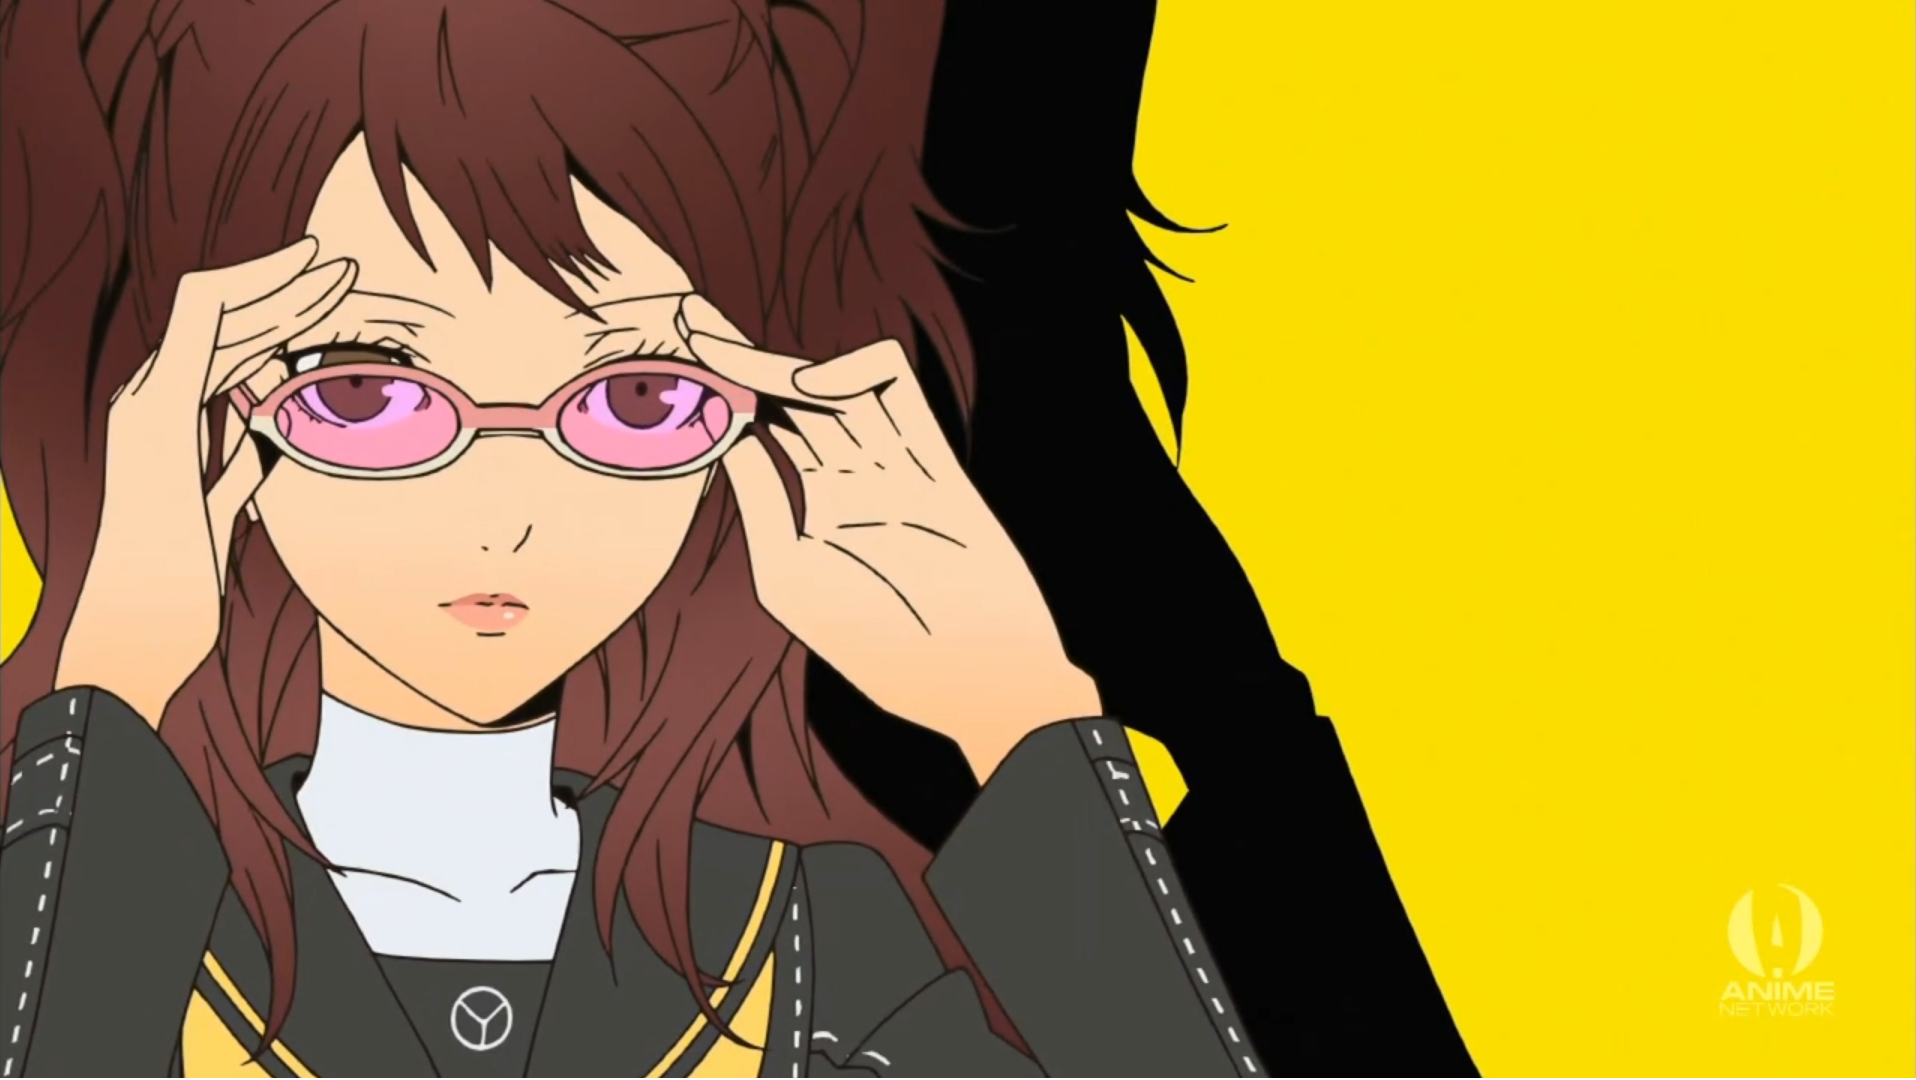 http://images2.wikia.nocookie.net/__cb20120121124231/persona4theanimation/images/2/2a/Rise.png